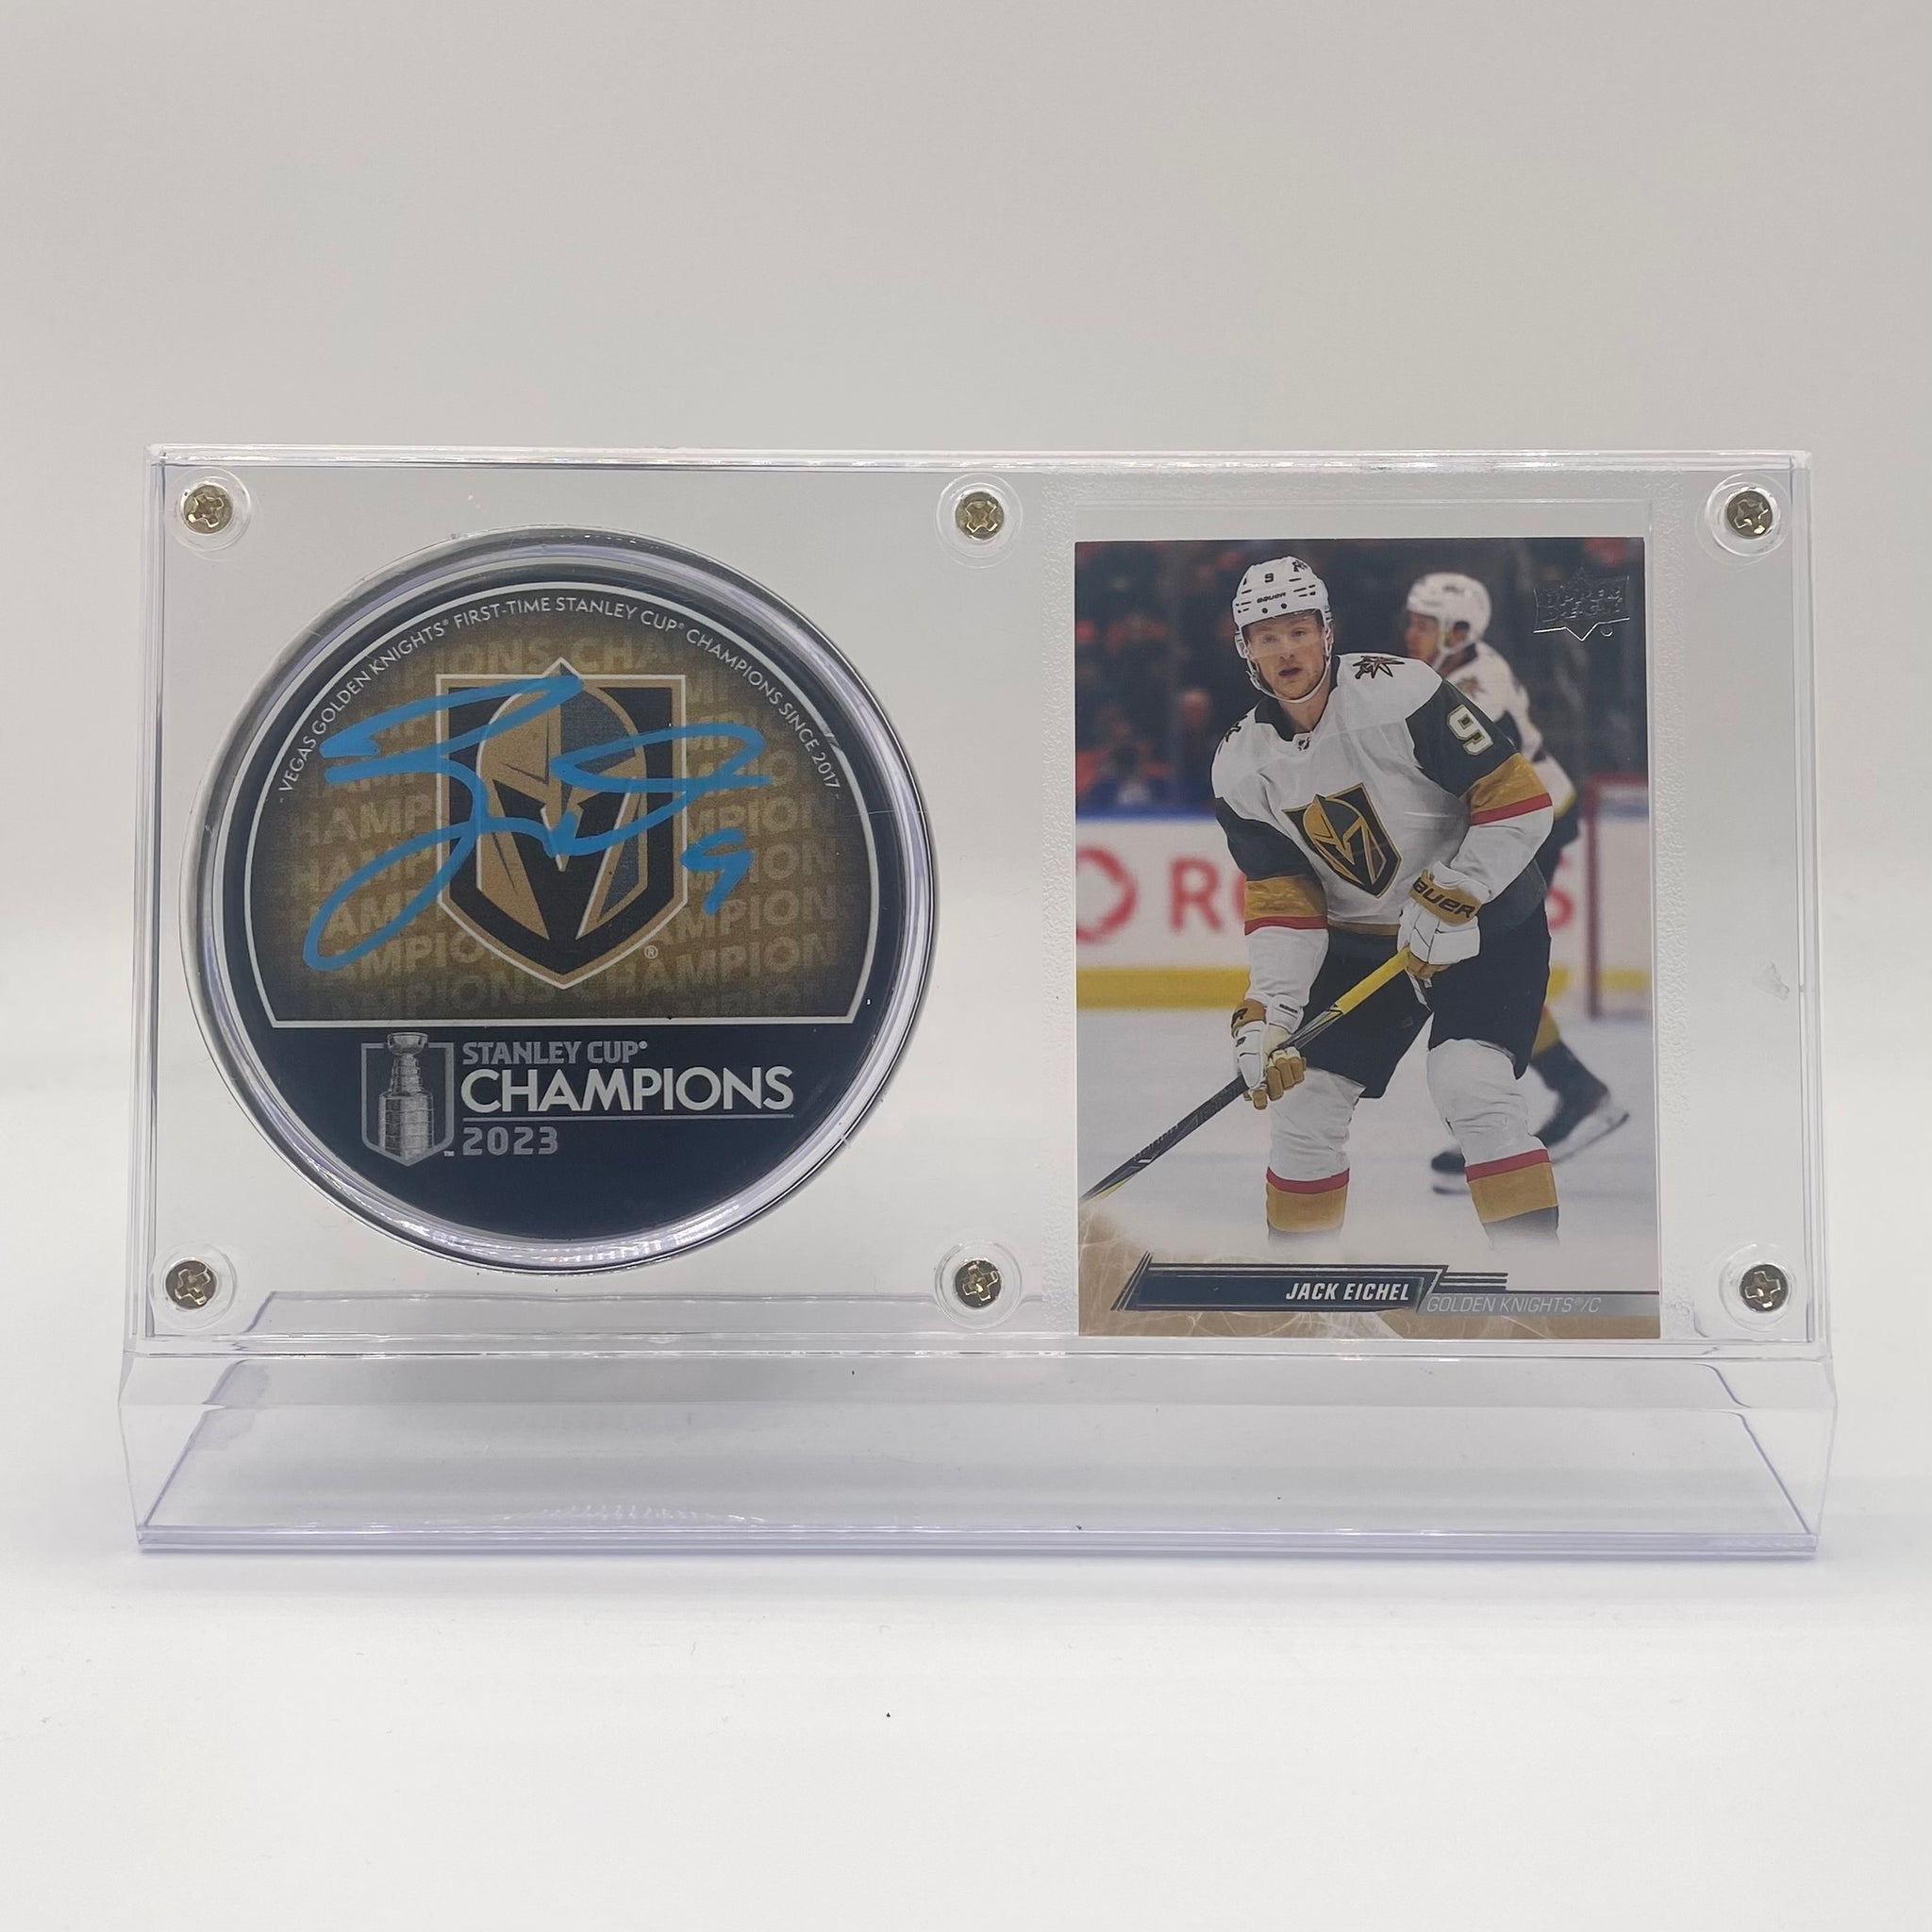 Jack Eichel Vegas Golden Knights Stanley Cup Champions Autographed Hockey Puck and Trading Card Case